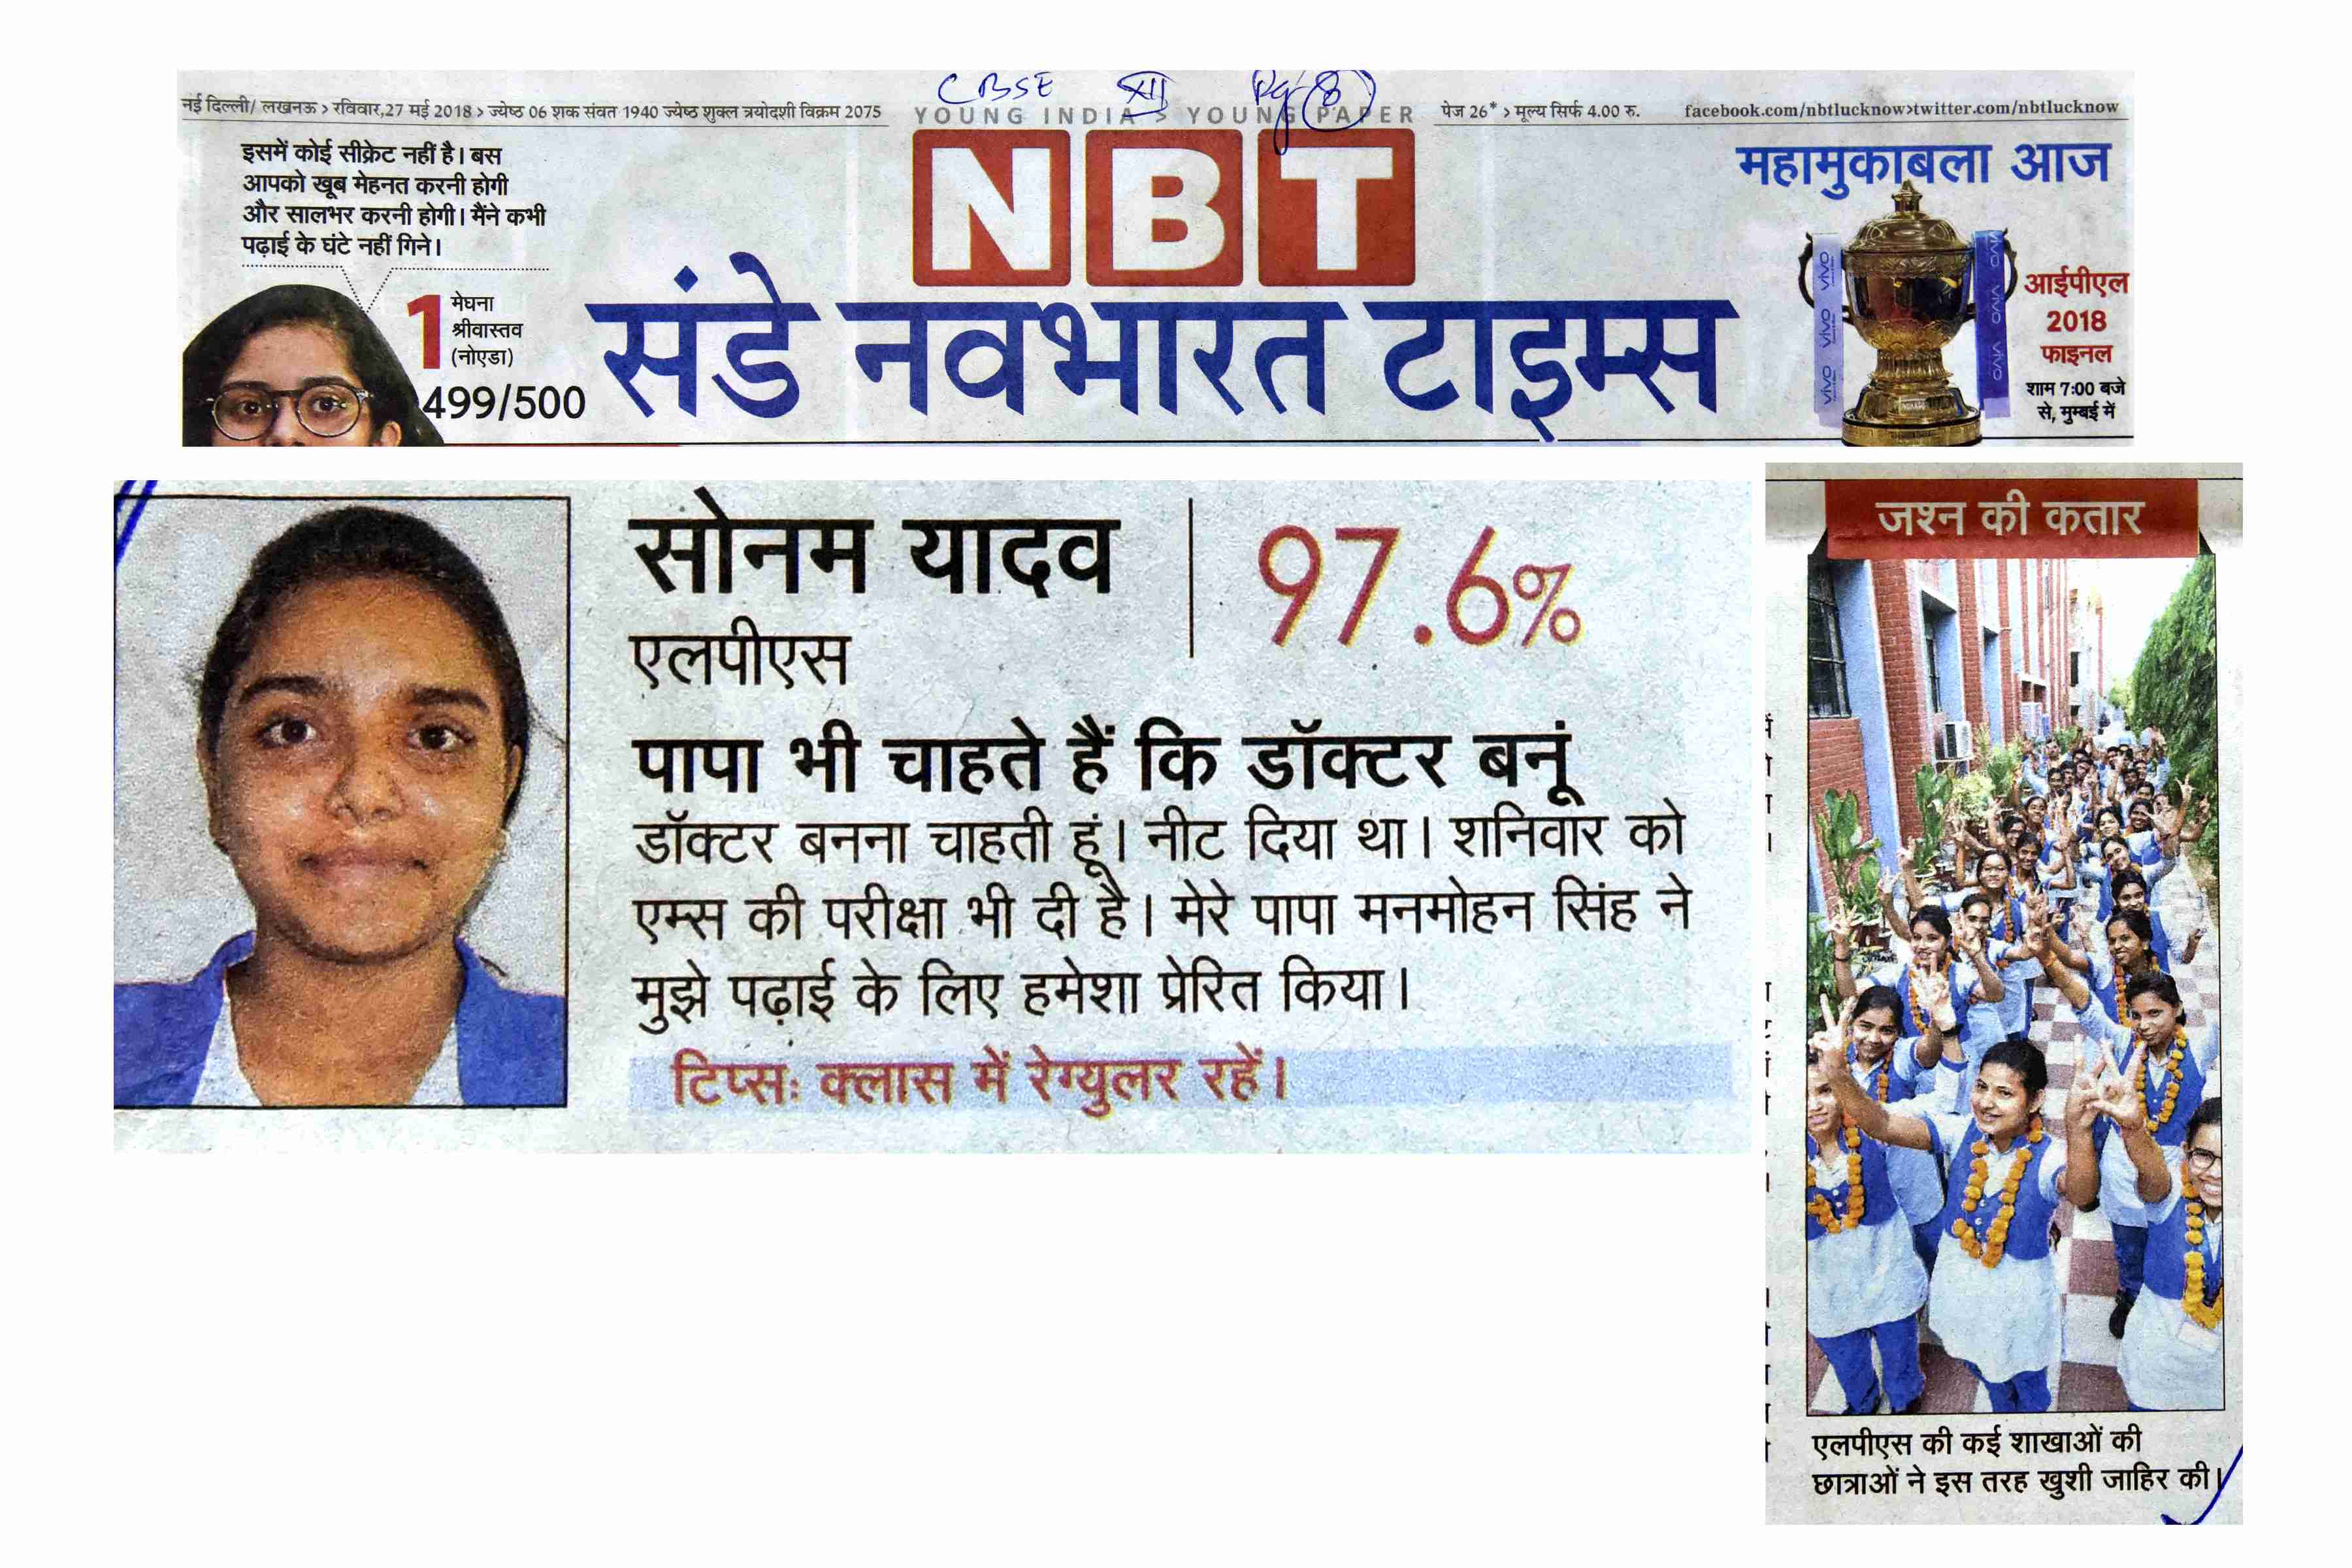 CBSE RESULTS 27th MAY 2018-NBT PAGE 8